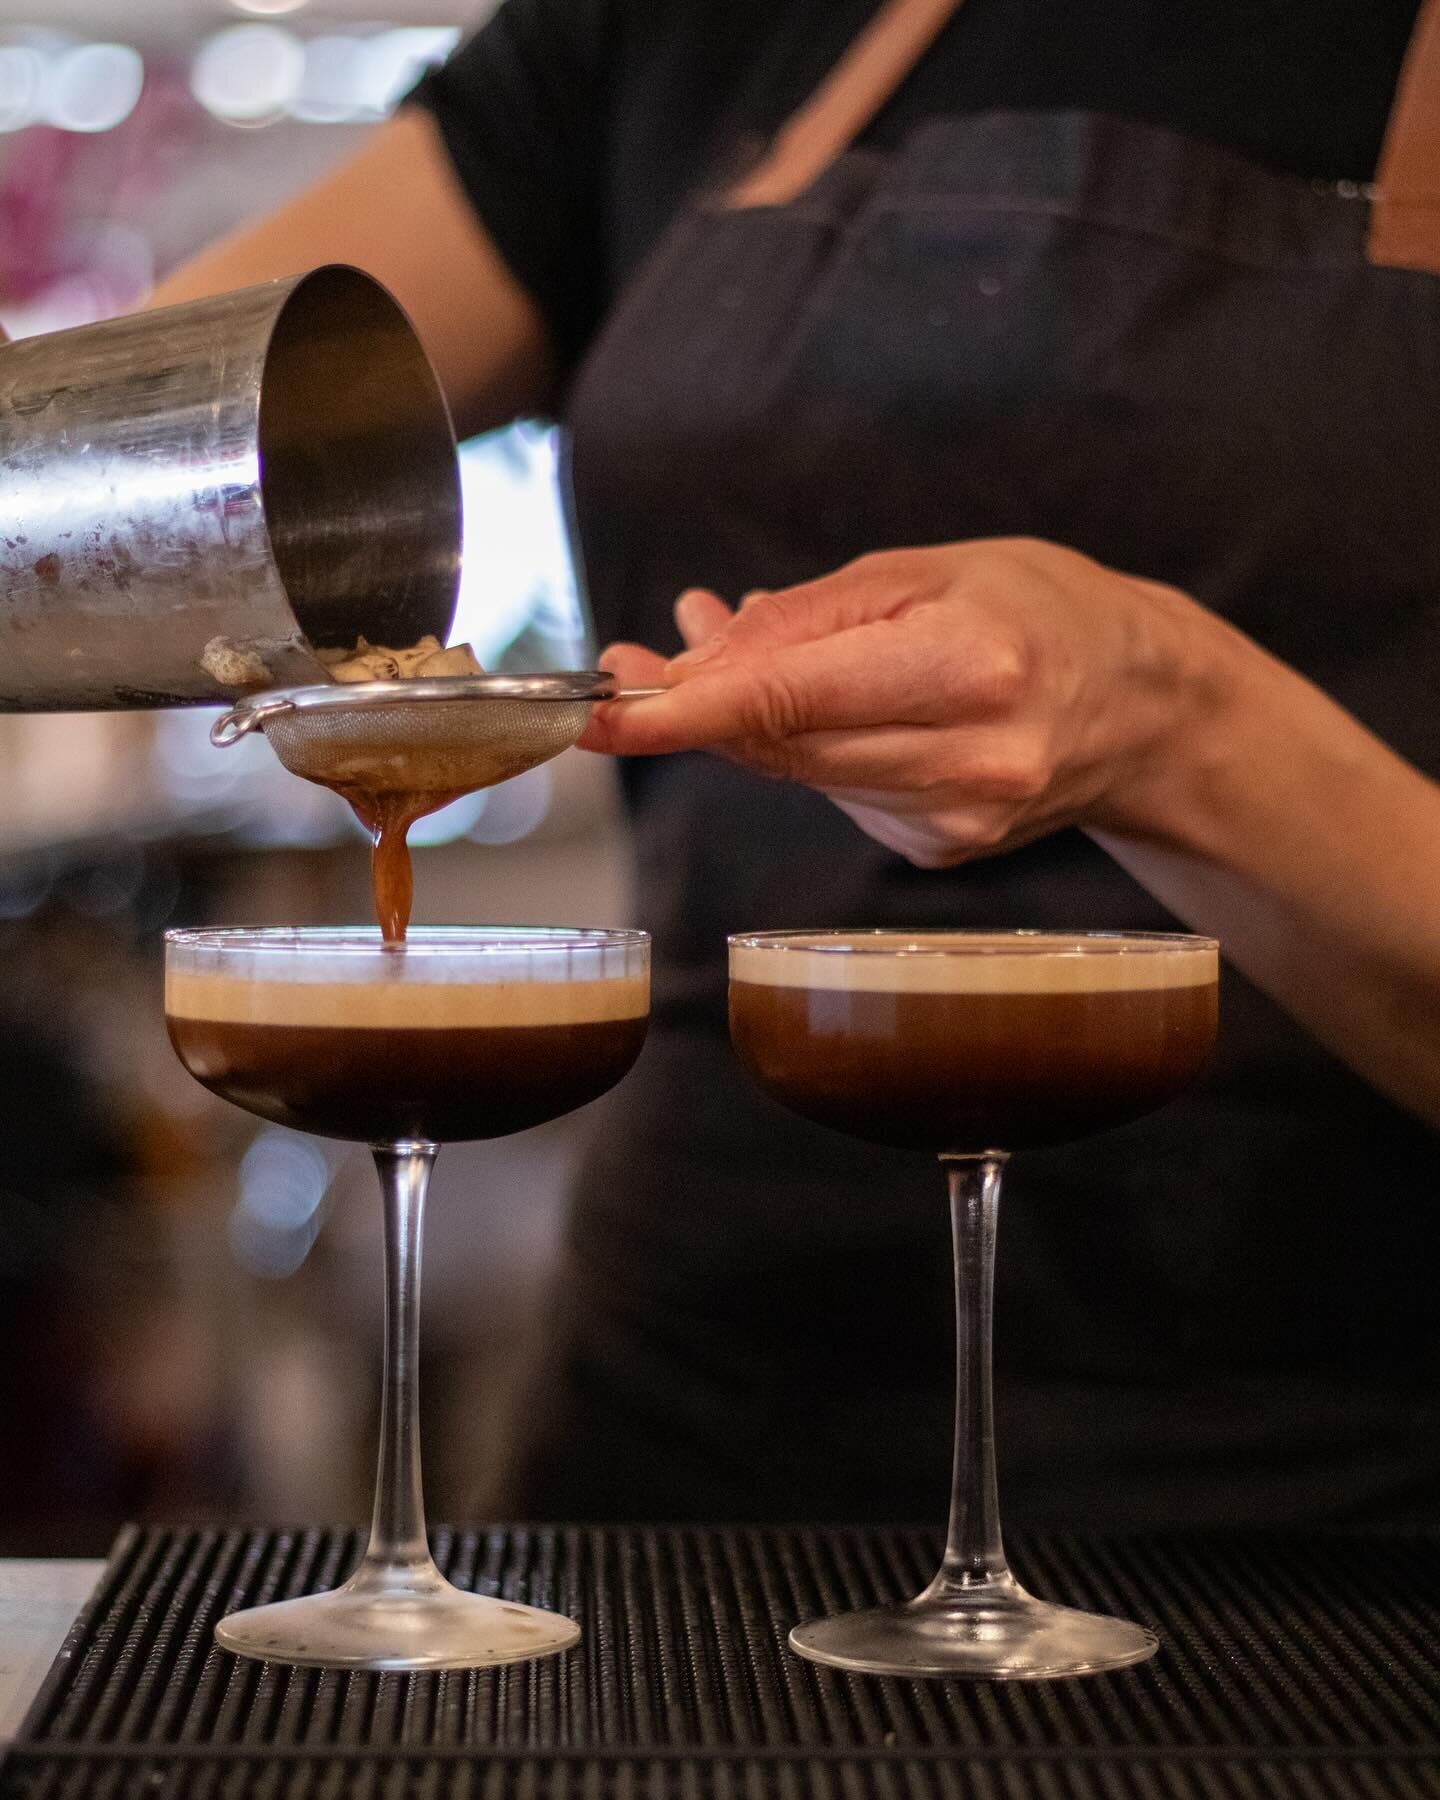 Come celebrate National Espresso Martini Day with us! Try our delicious Beirutini, handcrafted with Turkish coffee, vanilla vodka, and a hint of cardamom spiced syrup.